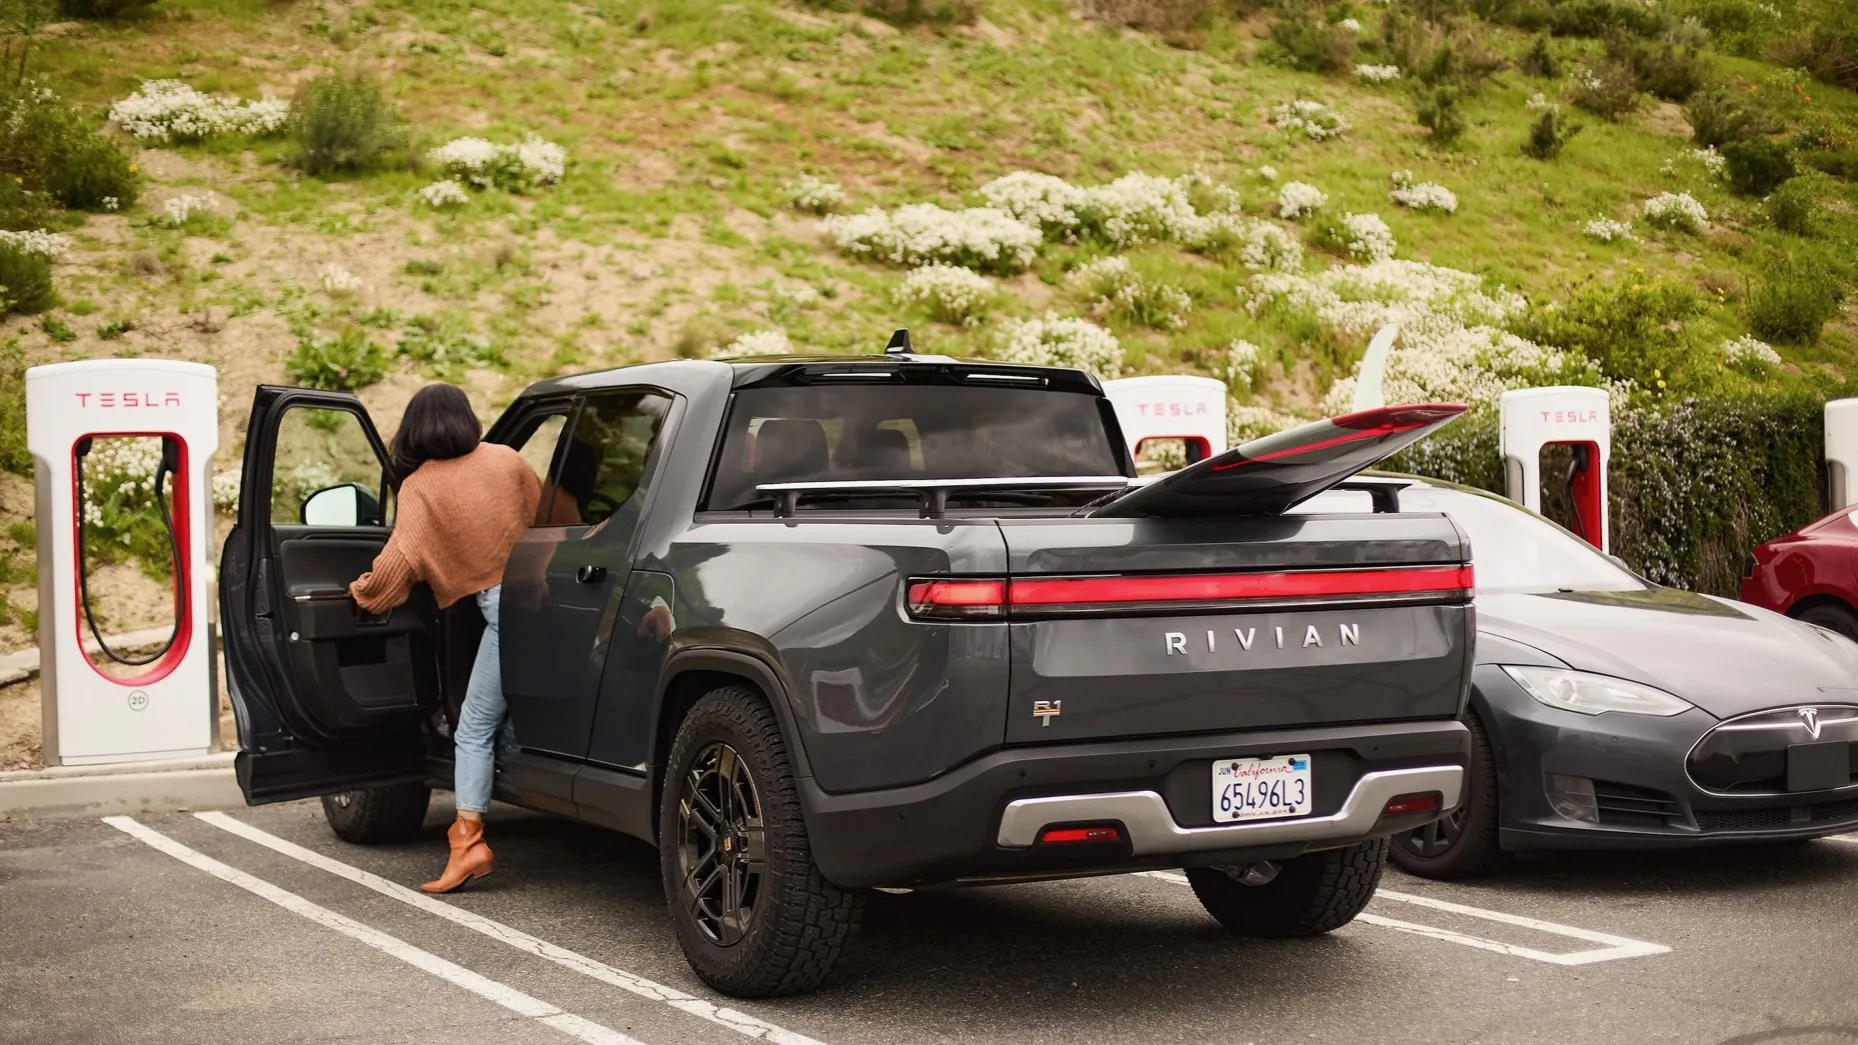 Rivian EV route planner will grade charging networks